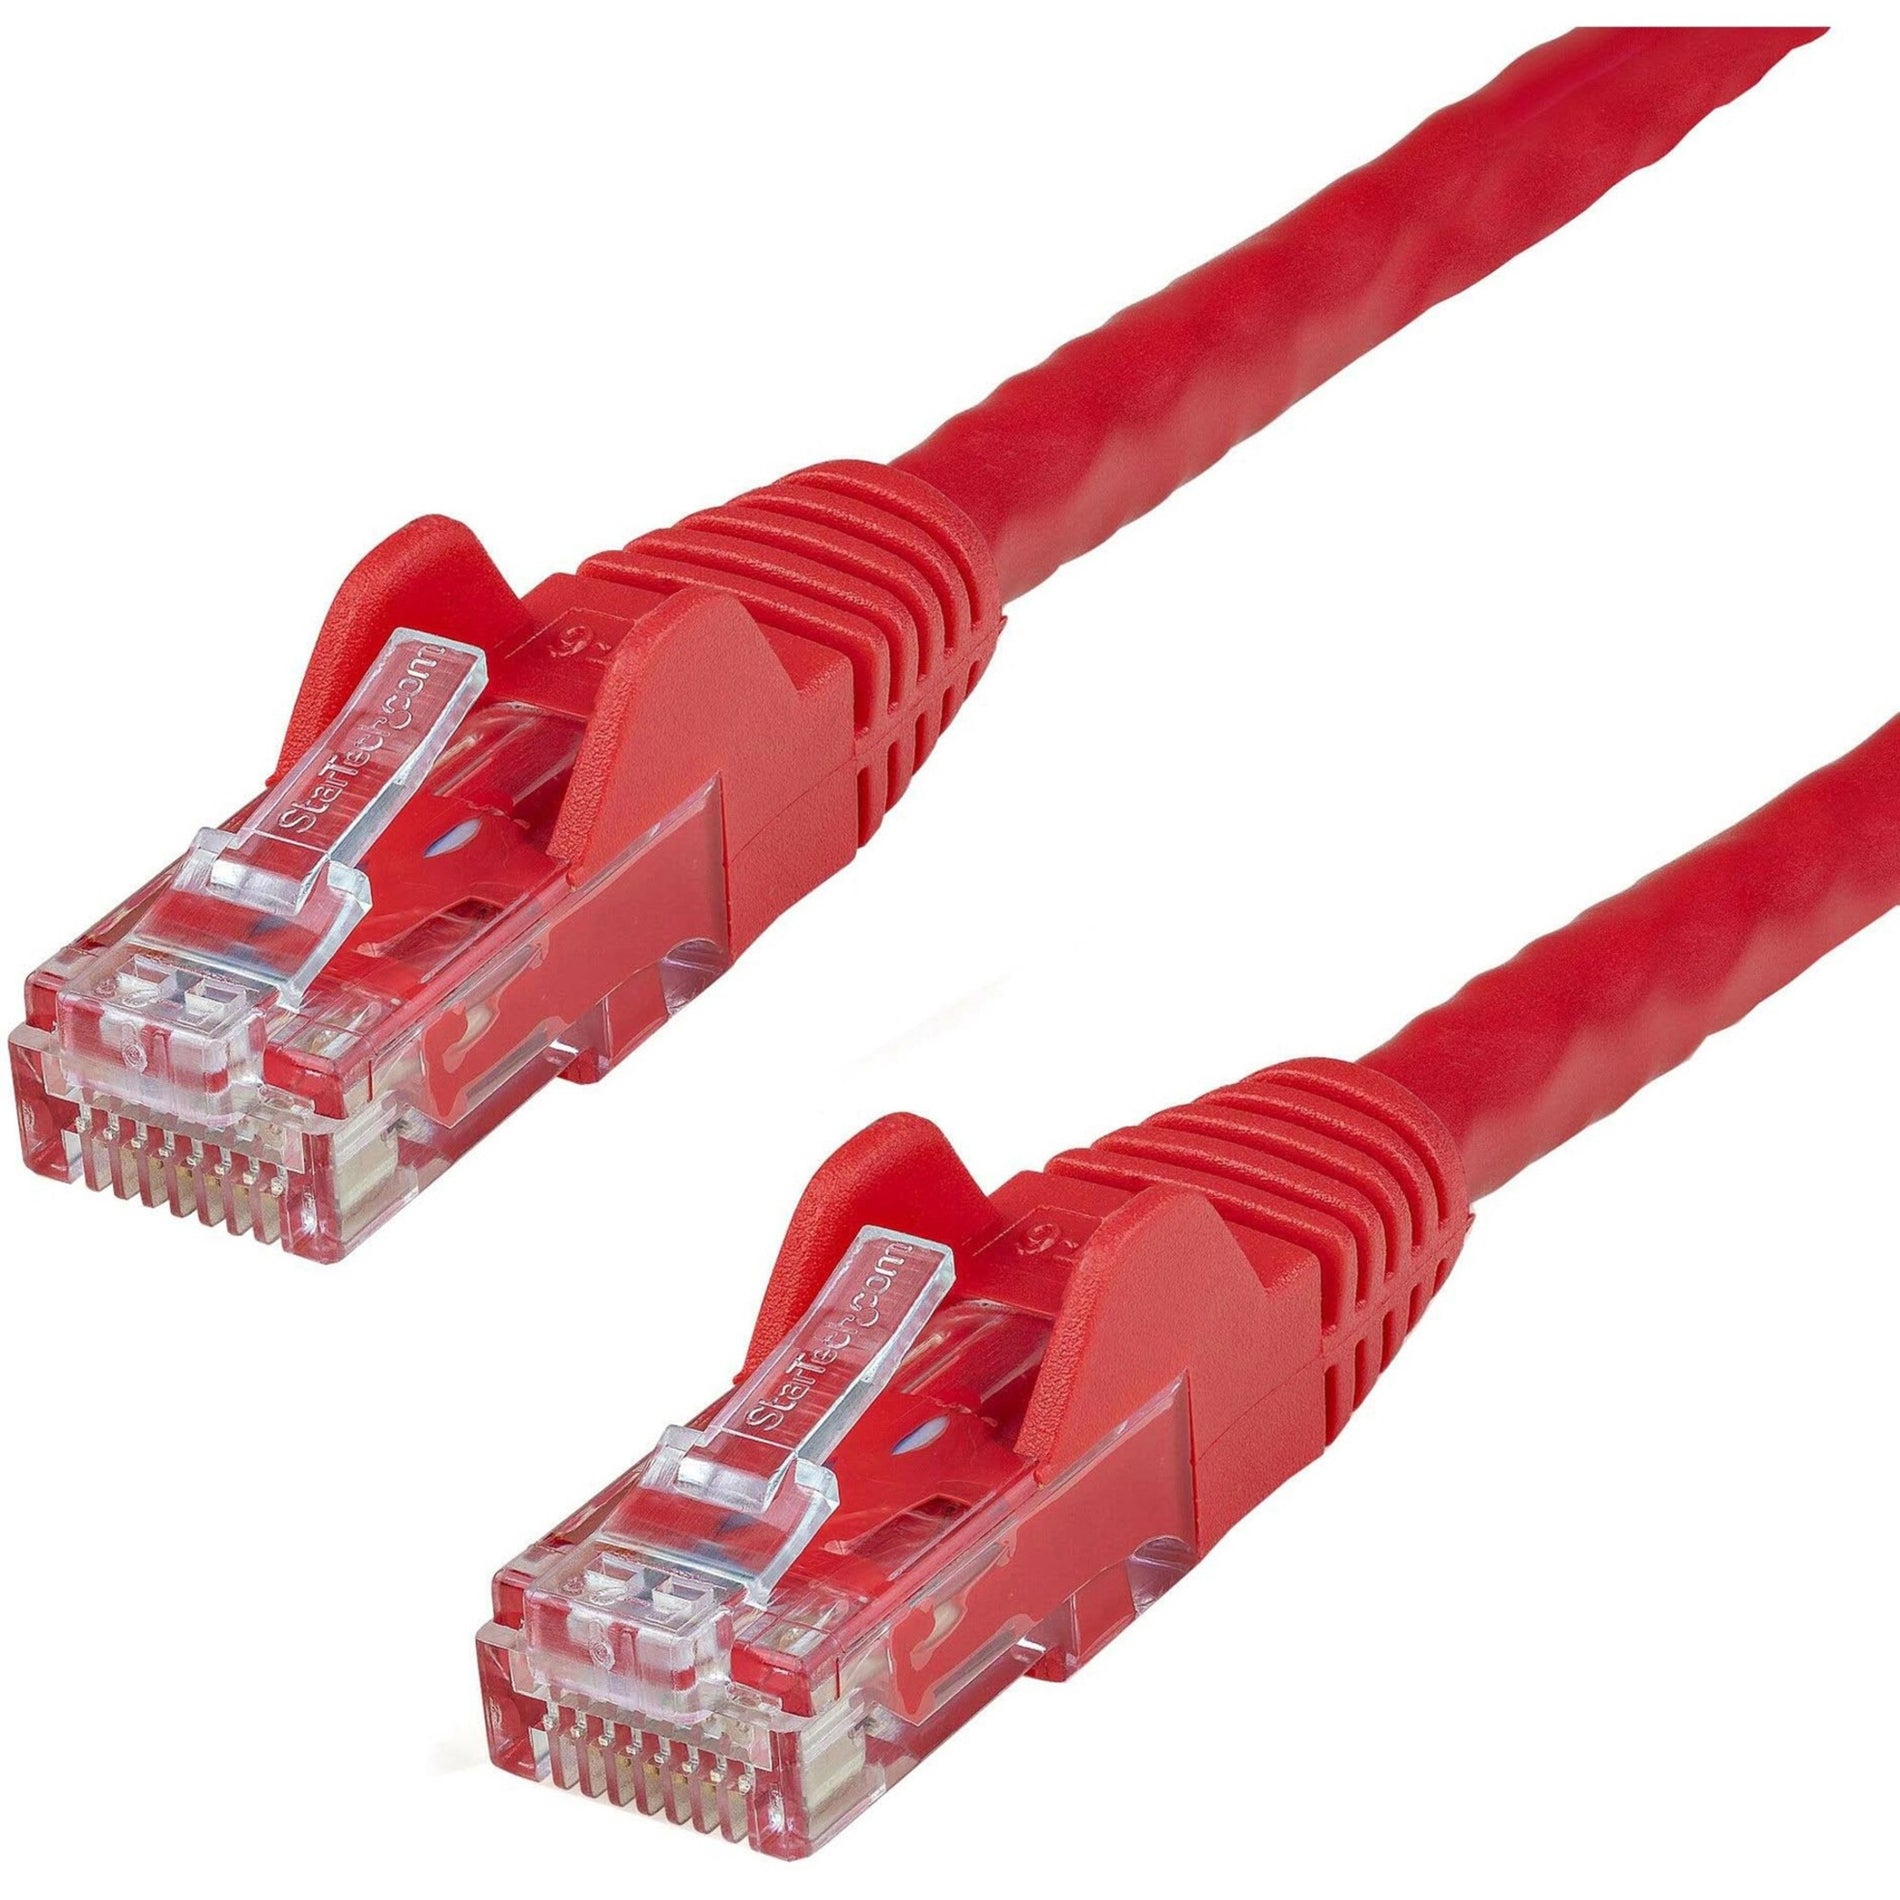 StarTech.com N6PATCH10RD 10 ft Red Snagless Cat6 UTP Patch Cable, Molded, 10 Gbit/s Data Transfer Rate, Gold Plated Connectors